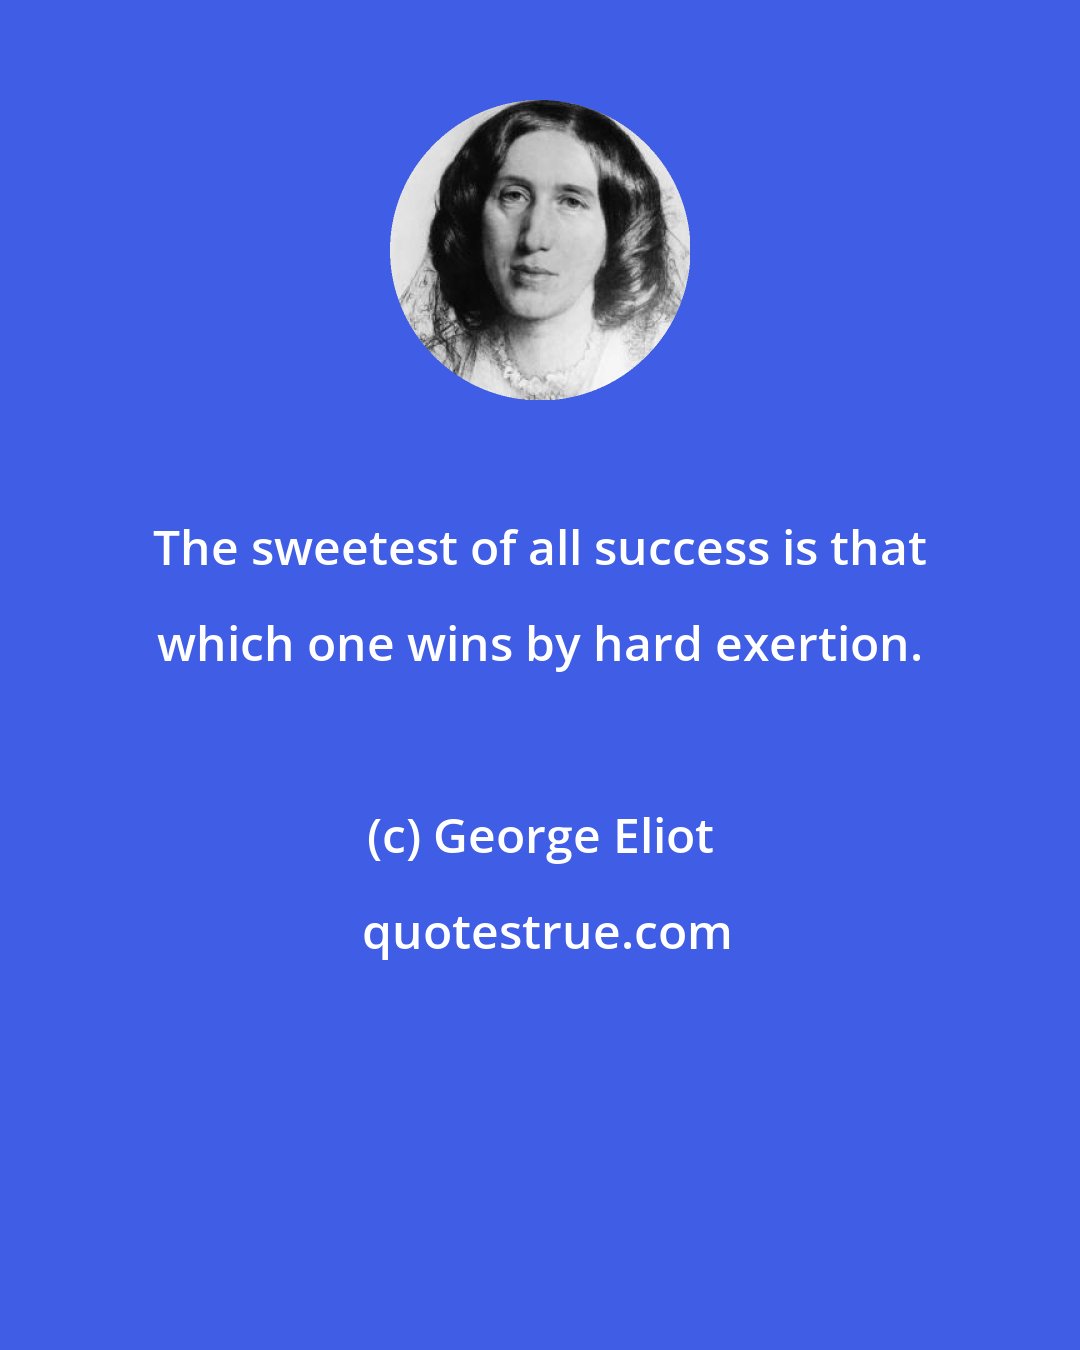 George Eliot: The sweetest of all success is that which one wins by hard exertion.